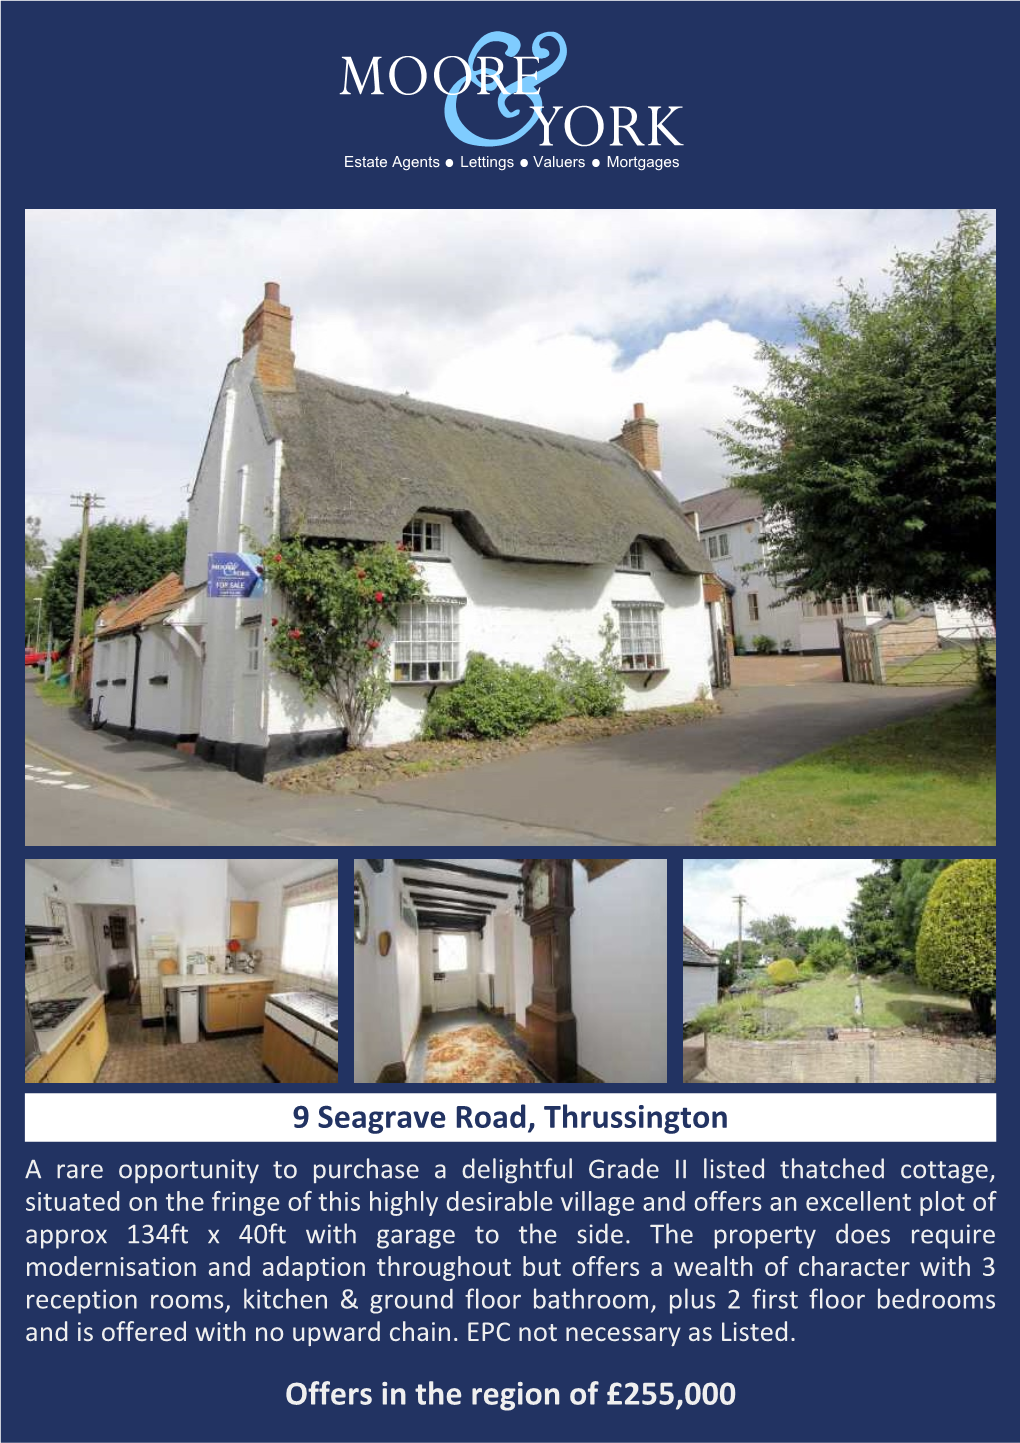 Offers in the Region of £255,000 9 Seagrave Road, Thrussington